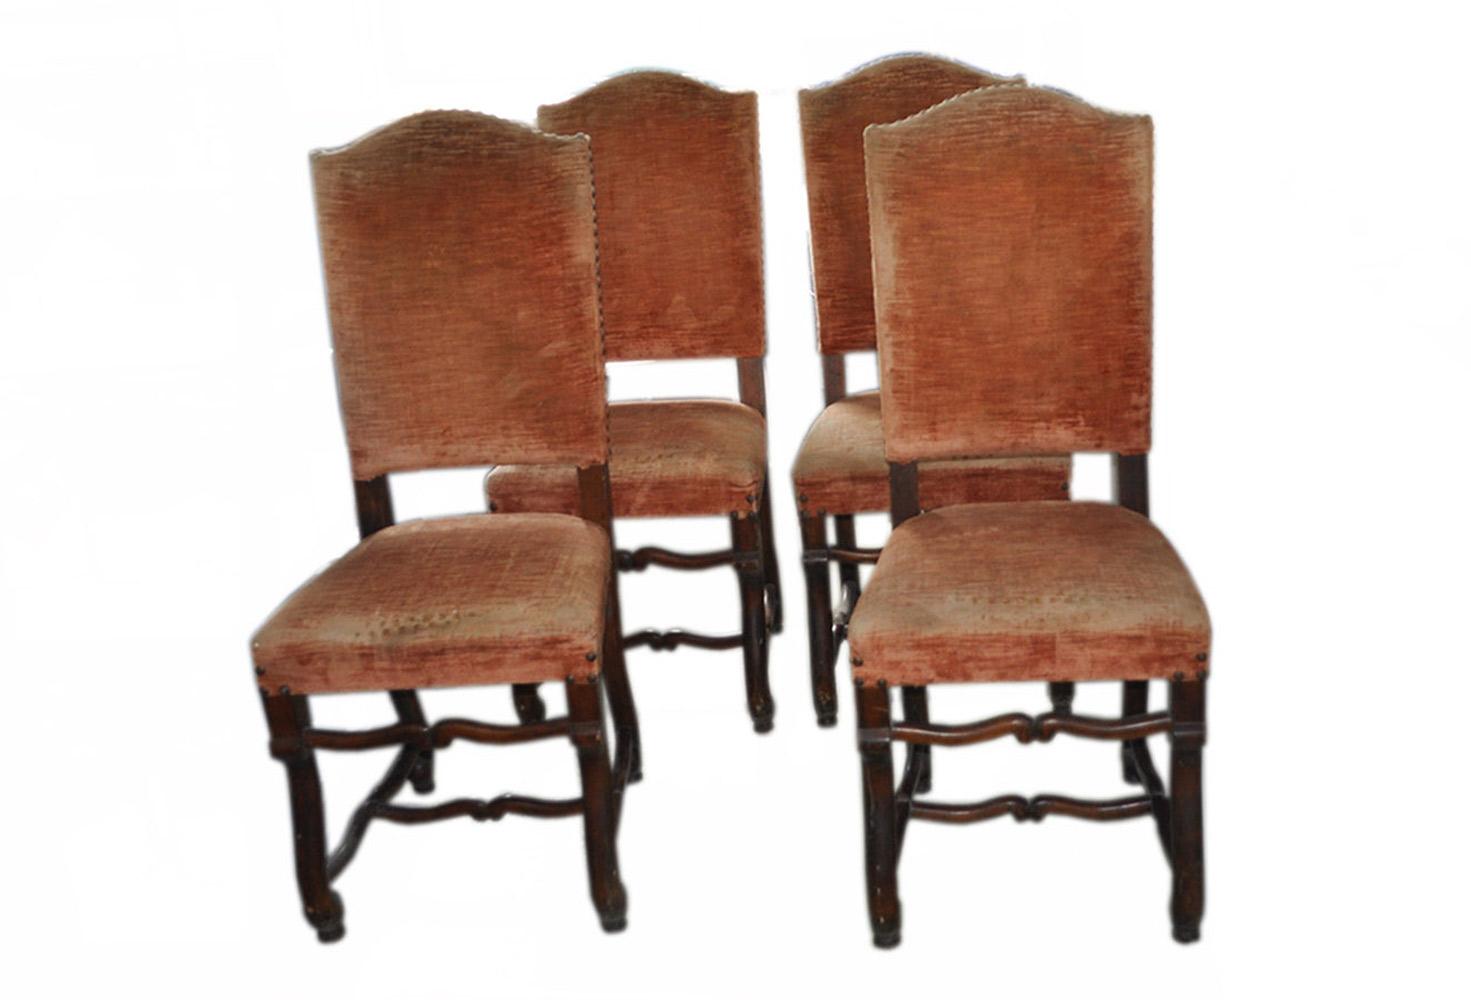 Original set of 4 dining chairs In very good condition for their age, Hardwood frames.
 Chairs are in the Louis XIV style.

Condition: Good. The frames are in nice original condition. Structurally sturdy.

 